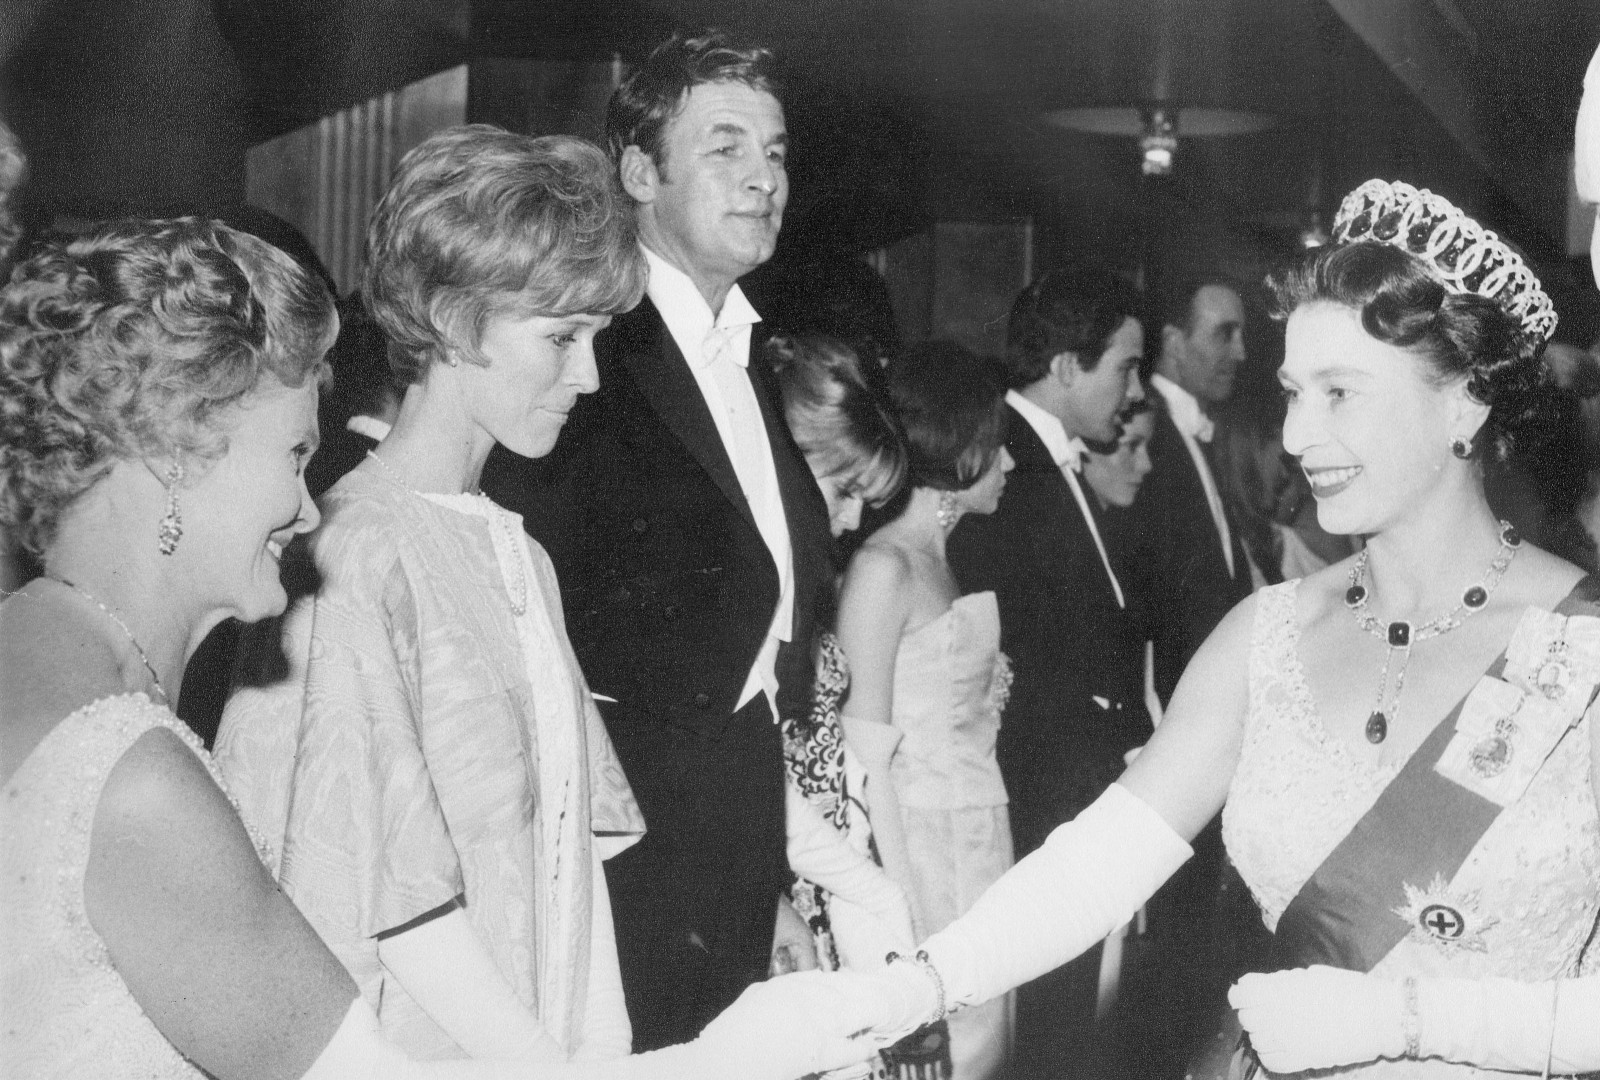 Joy Adamson, Virginia McKenna and Bill Travers line up to meet Her Majesty The Queen at the premiere of Born Free